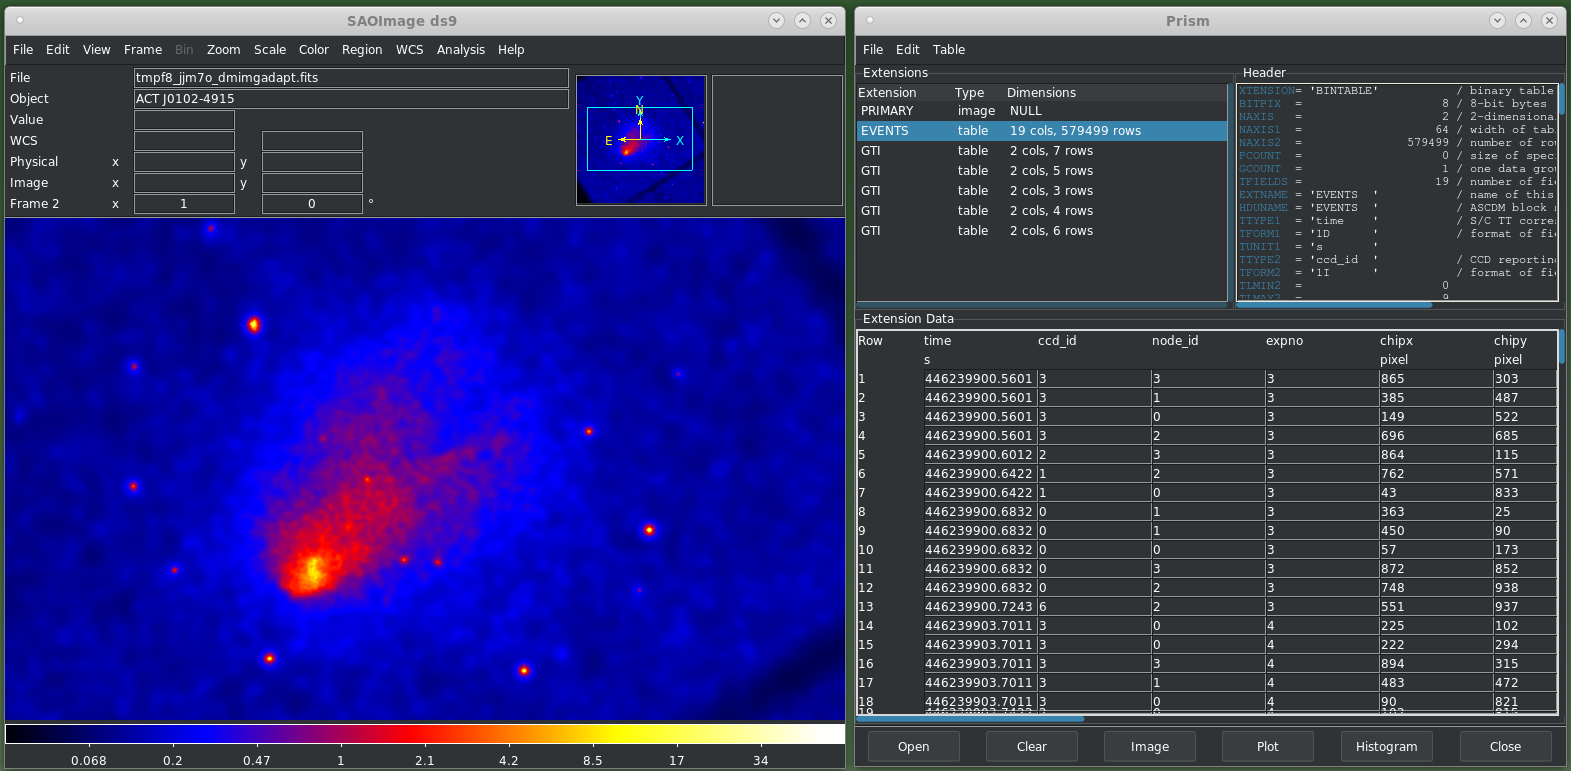 A screenshot of SAOImageDS9 and Prism next to each other; both are displayed in dark mode, such that they have a dark gray background. The DS9 image shows an astronomical image of an extended structure with multiple nearby point sources. Its color scheme is black and blue to yellow via purple and red. The Prism window shows a list of Extensions, header data information, and then extension data, listing a table of properties including row number, time, ccd_id, and chip pixels. 